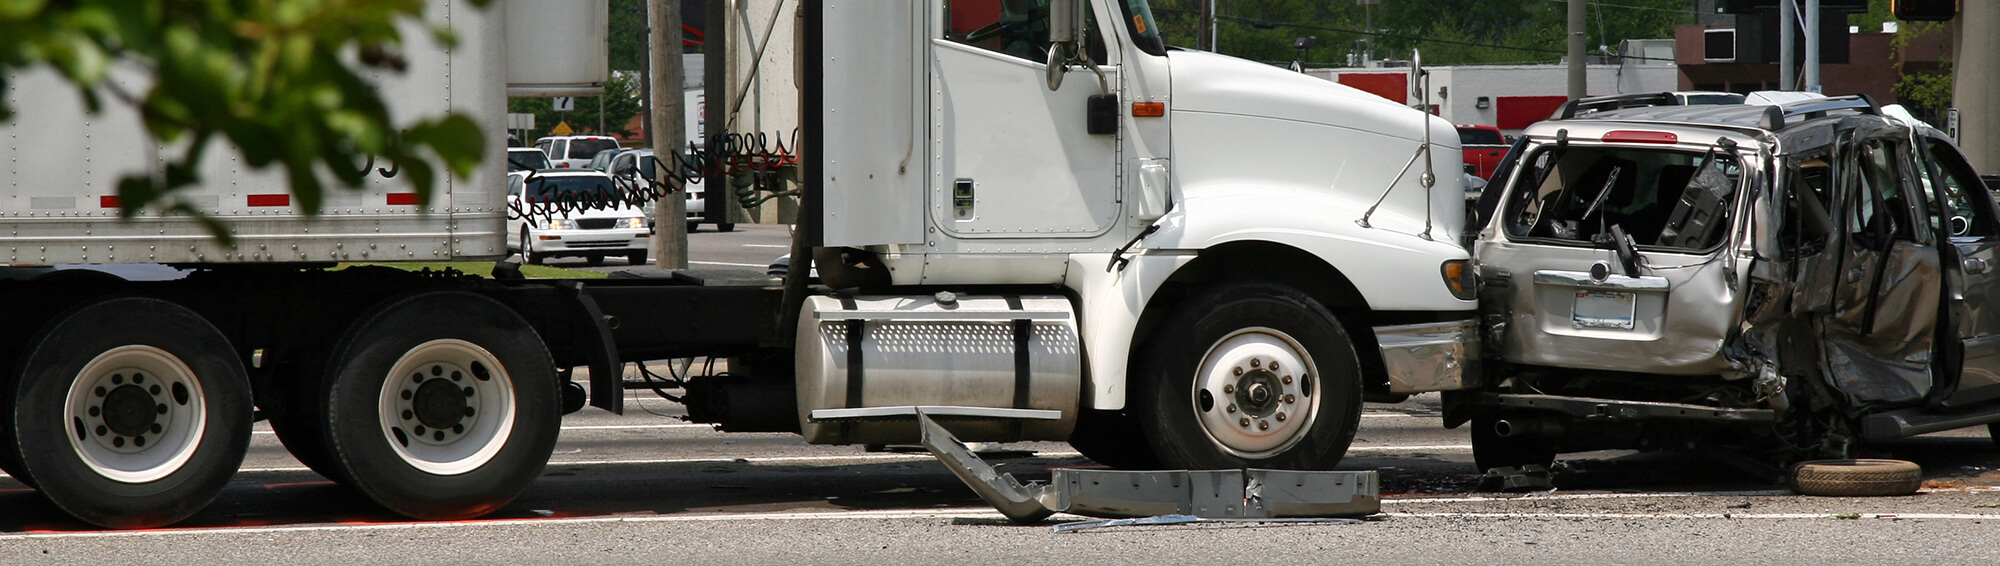 Tennessee Truck Accident Results in Two Injuries